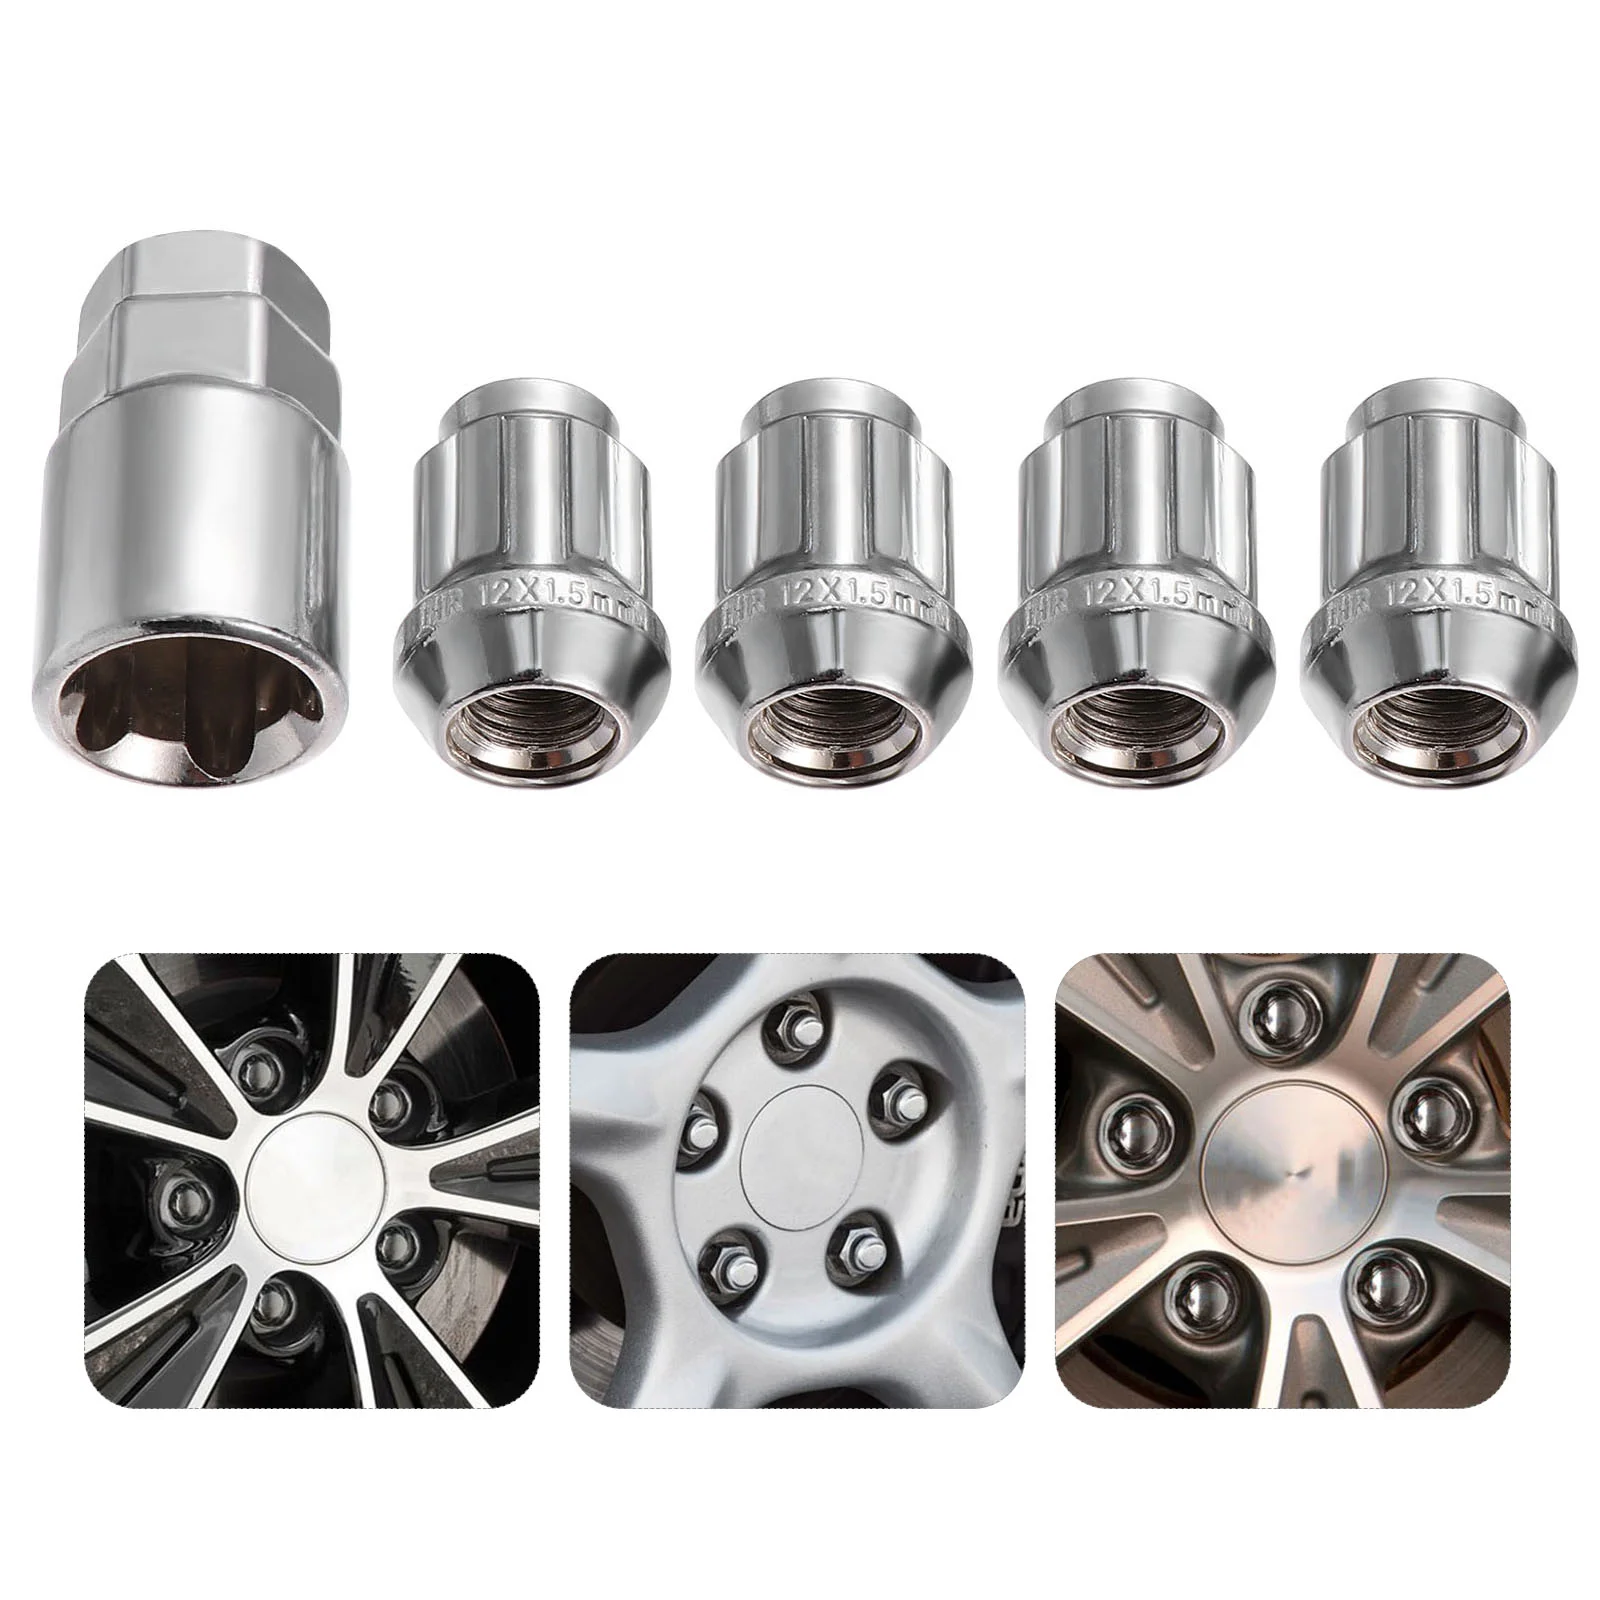 

Wheel Nut Lock Nuts Lug Locks Anti Car Acorn End Kit Replacement Style Open Conical Lugnuts Hex Tapered Closed Bulge Cone Parts